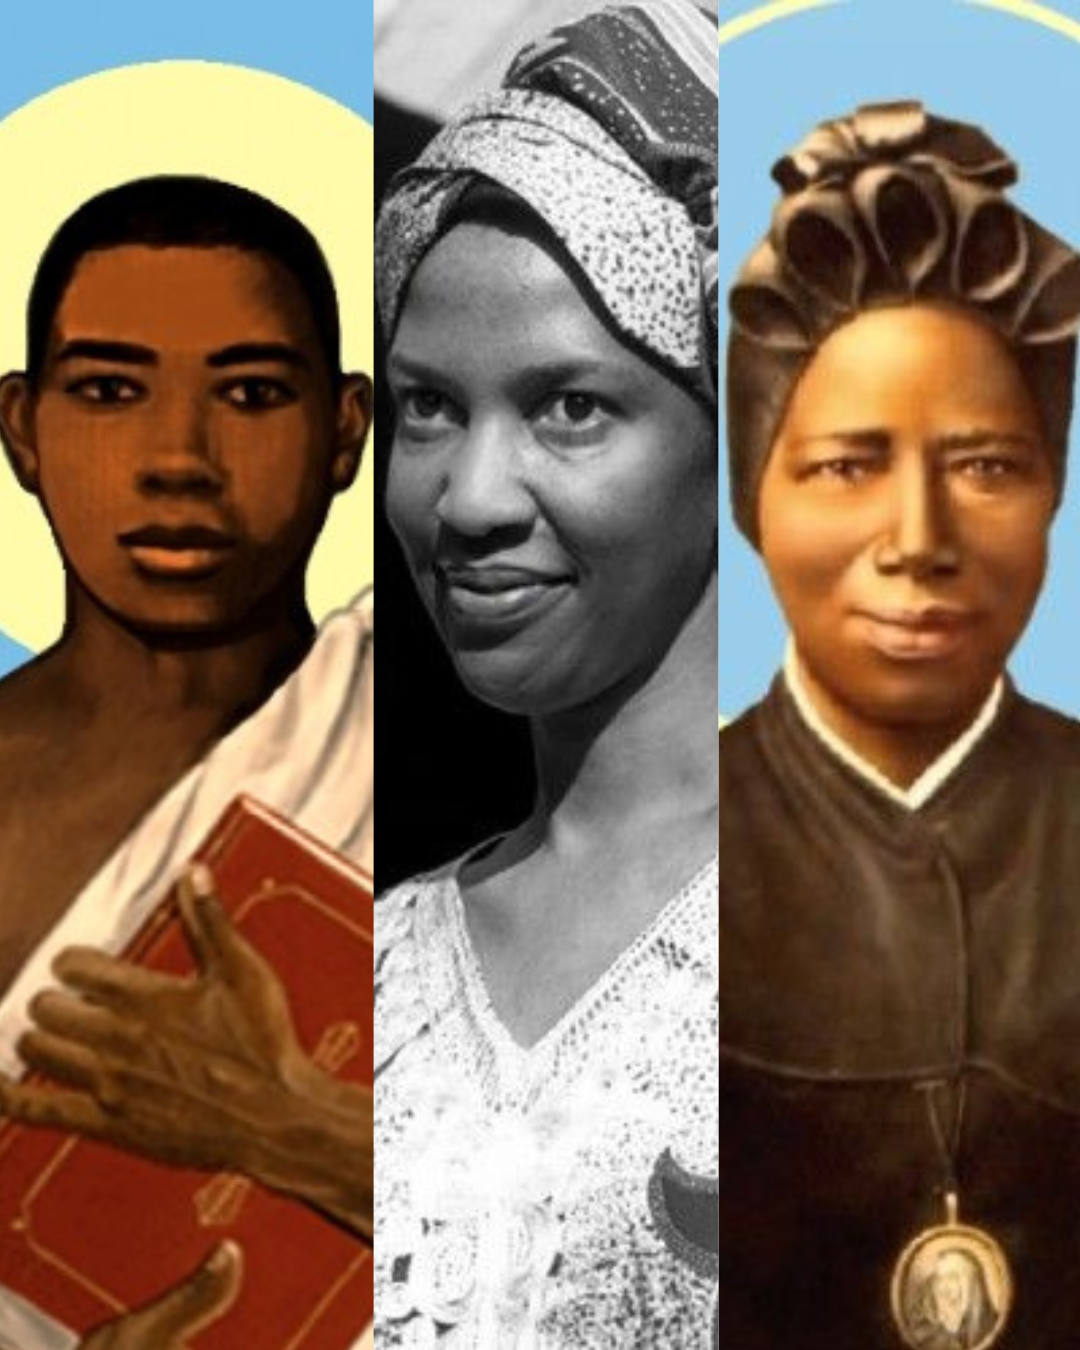 8 Black Saints & Holy People of God Every Catholic Should Know, With Prayers for Intercession